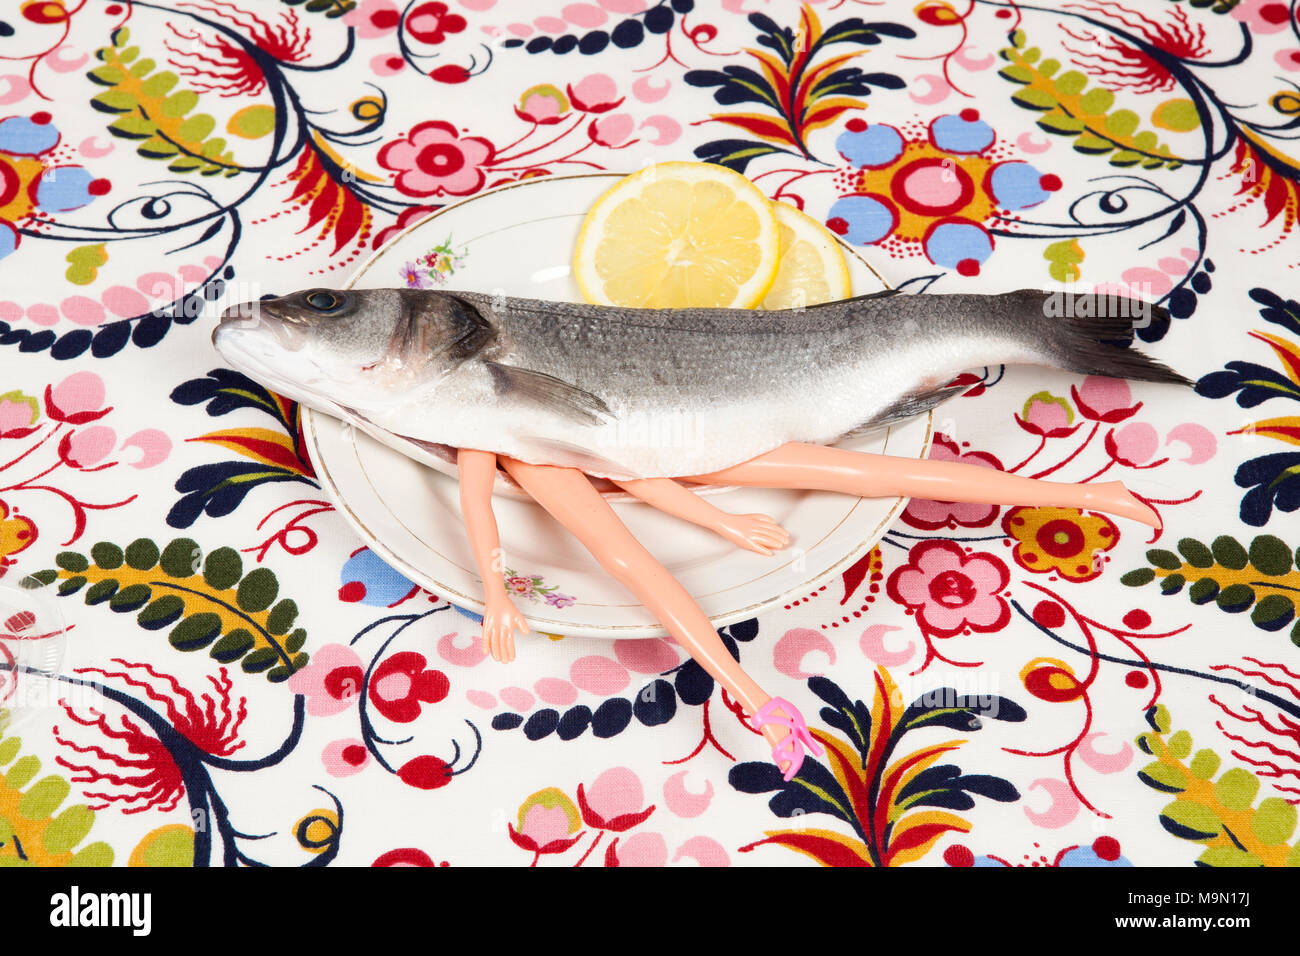 A bass fish with arms and legs of a doll inside on a flower plate.  Cannibalism and anthropomorphism on a floral fabric patterned background.  Quirky mi Stock Photo - Alamy